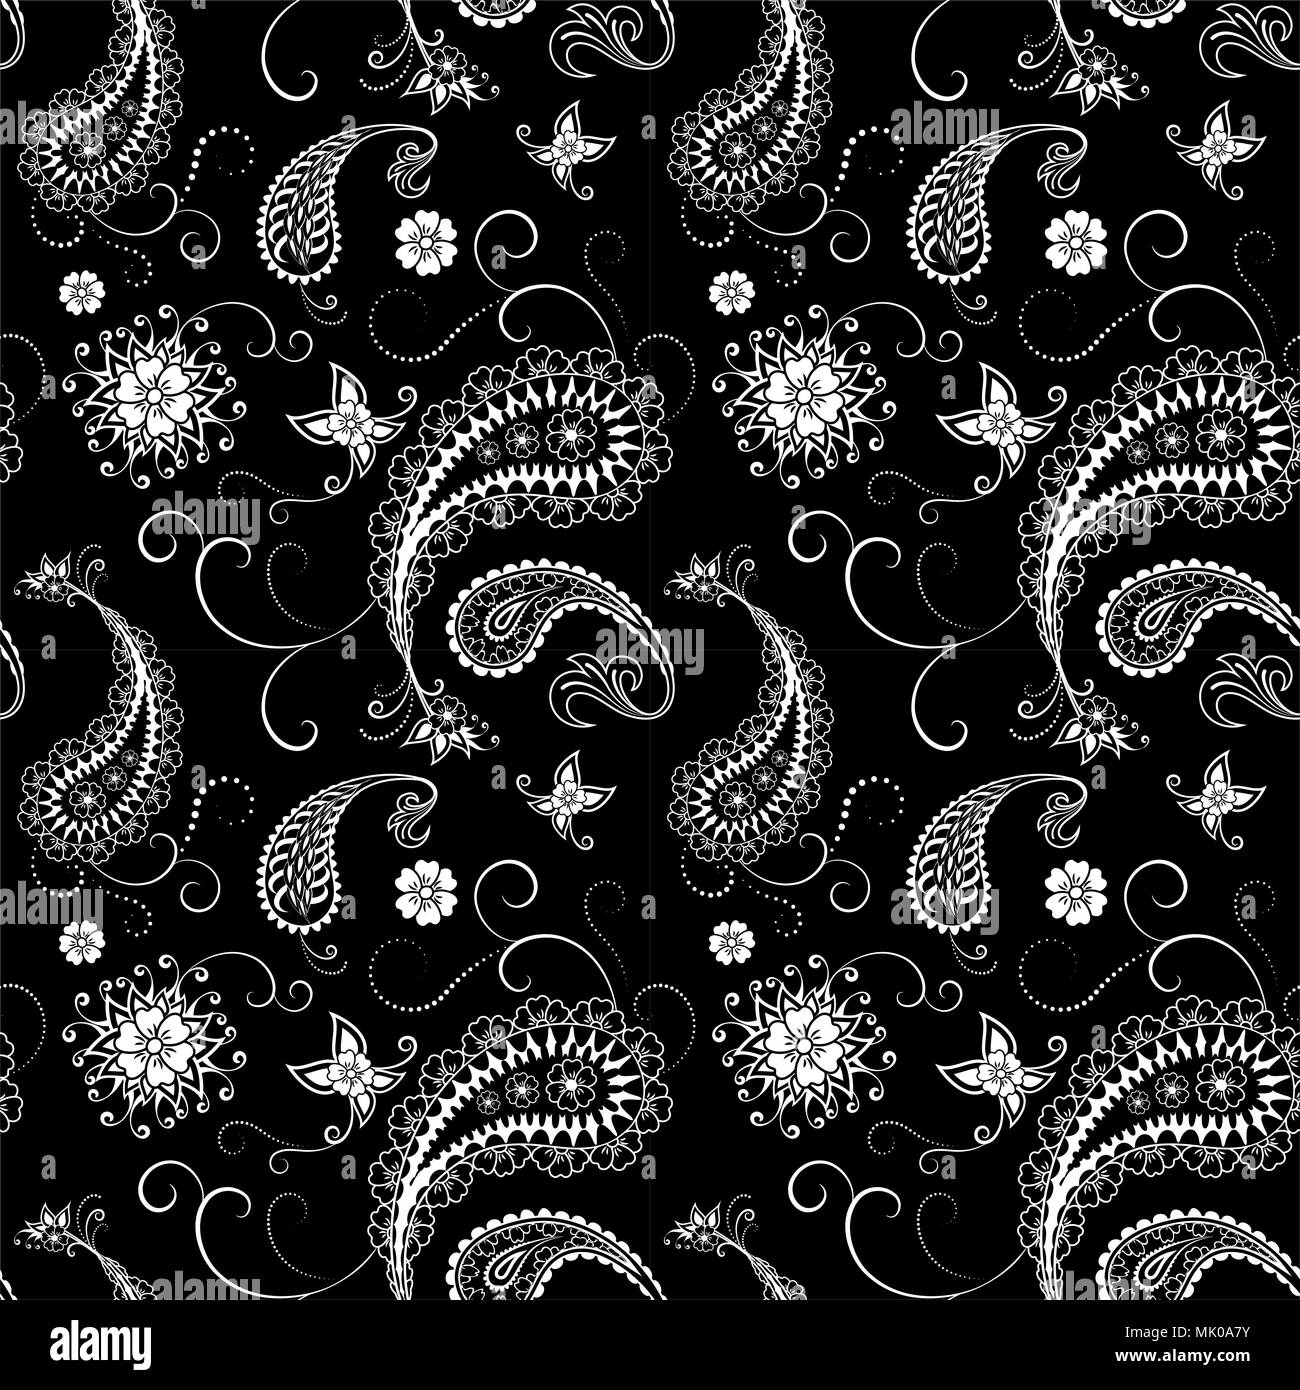 Simple Black And White Paisley